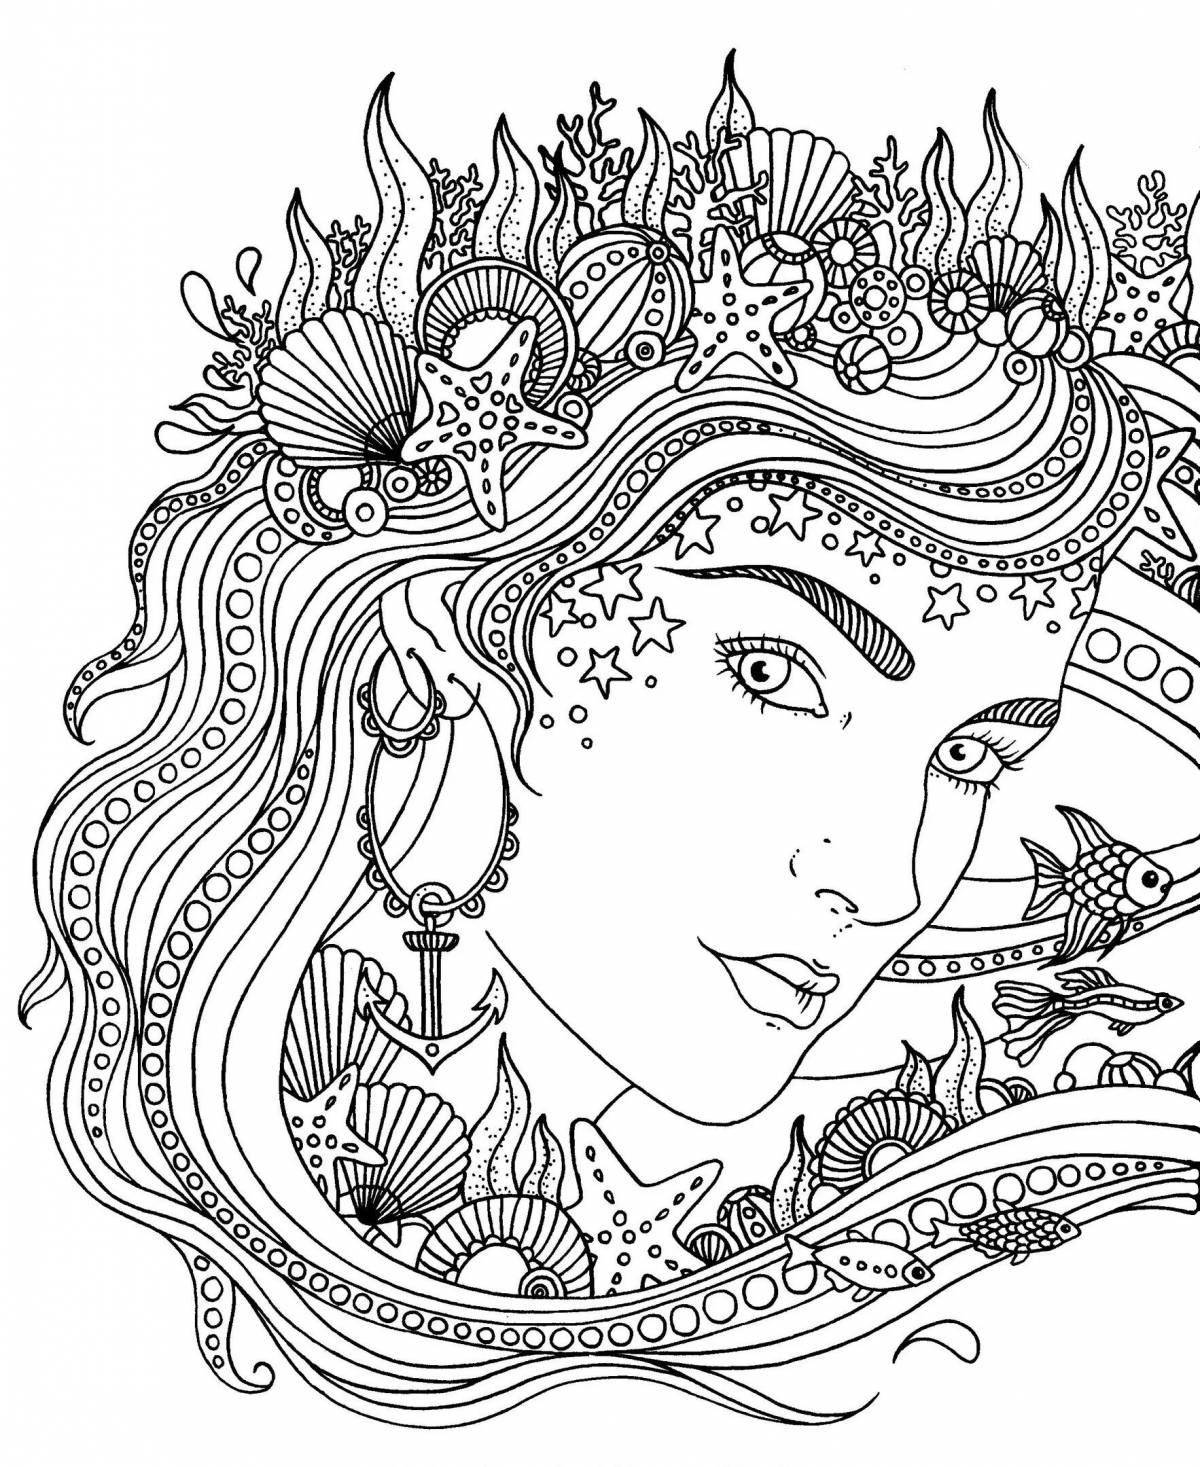 Fun coloring book for adult girls